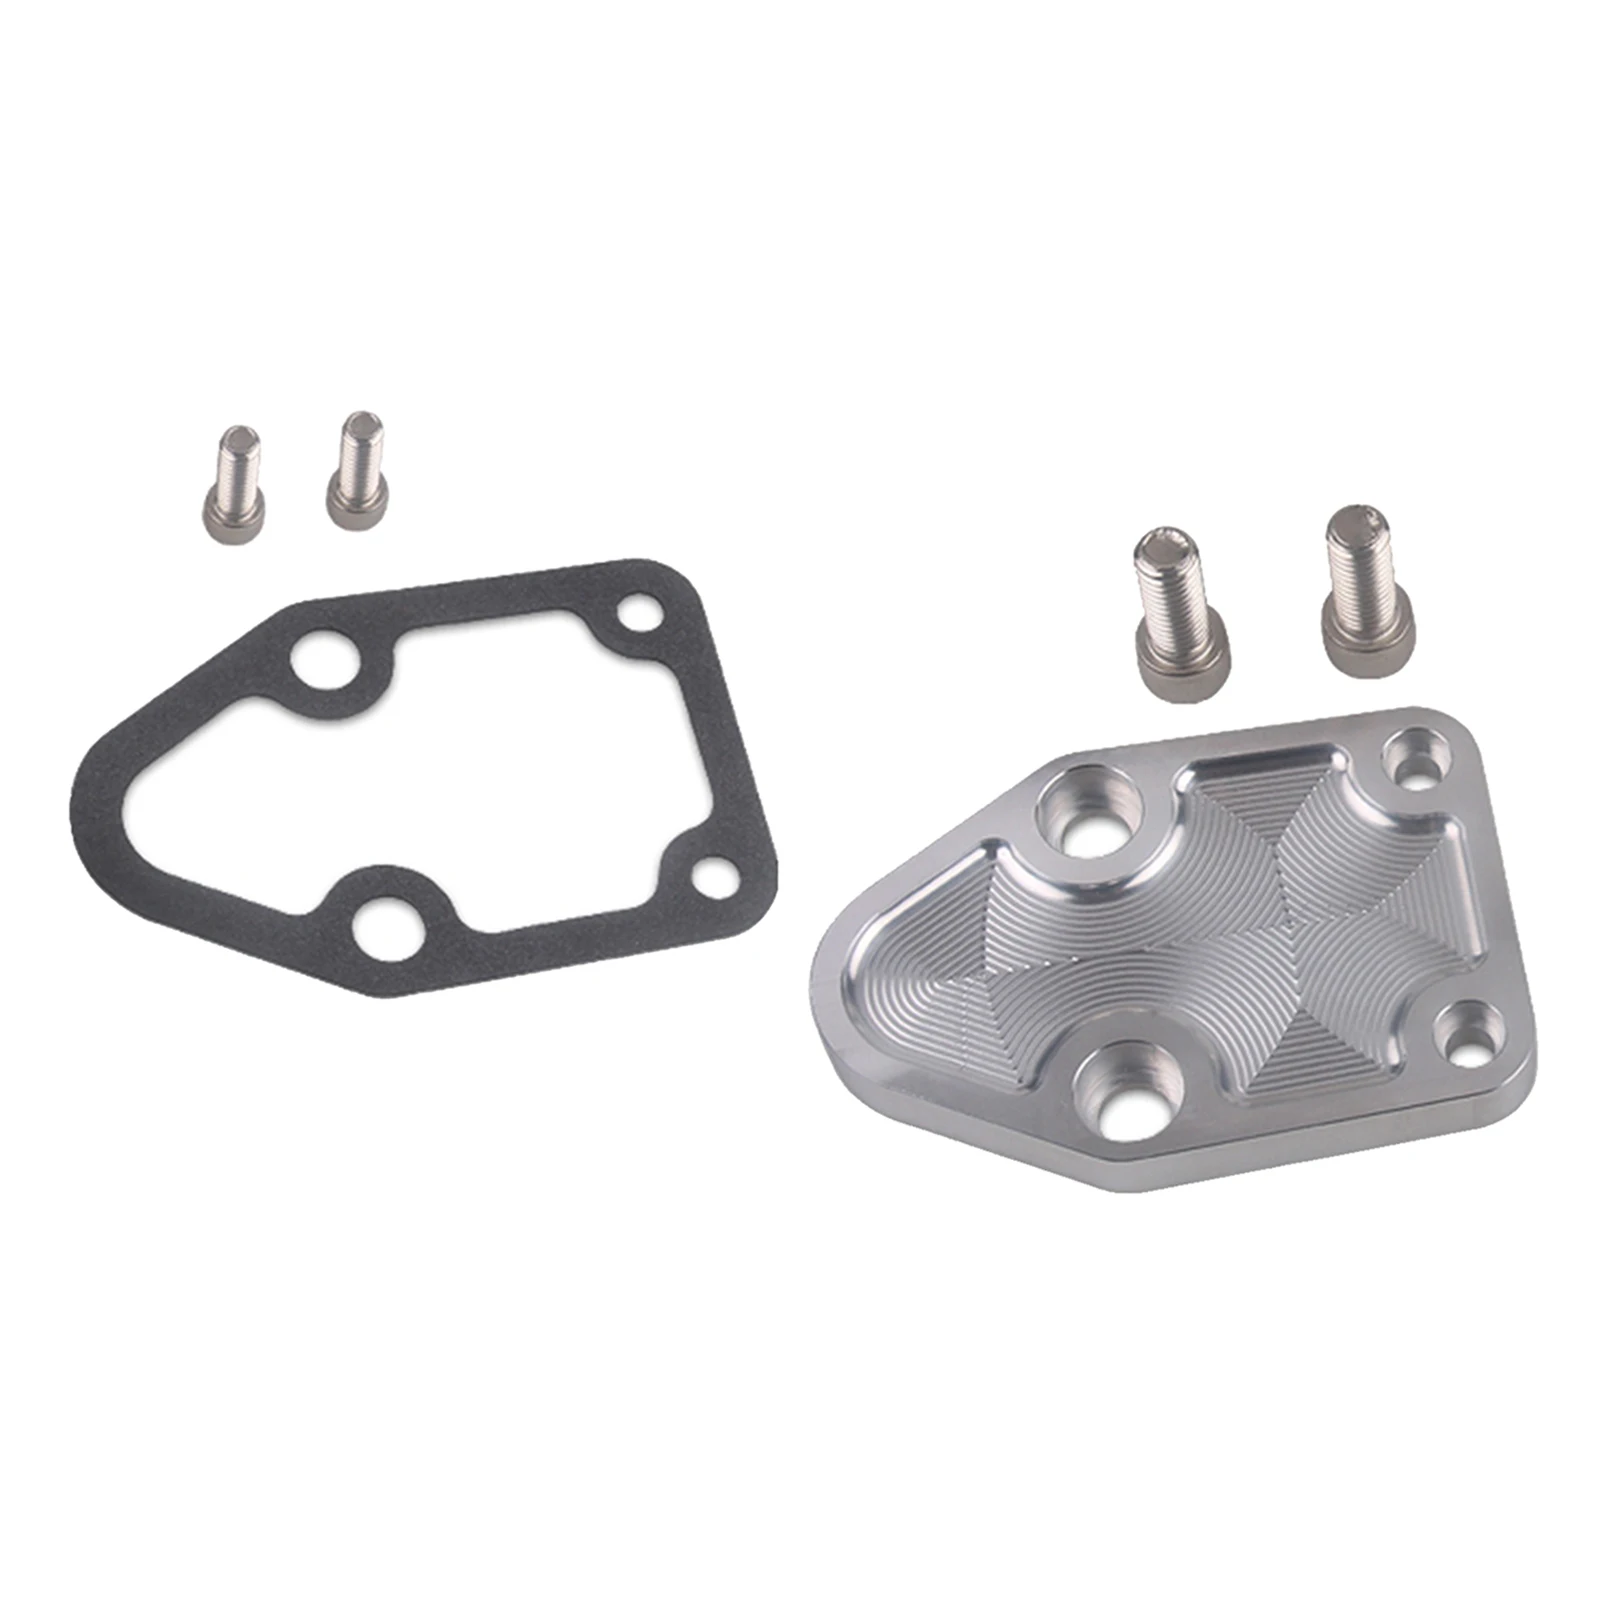 Professional Fuel Pump Plate Kit for  283 327 350 400, Stainless Compact and Lightweight